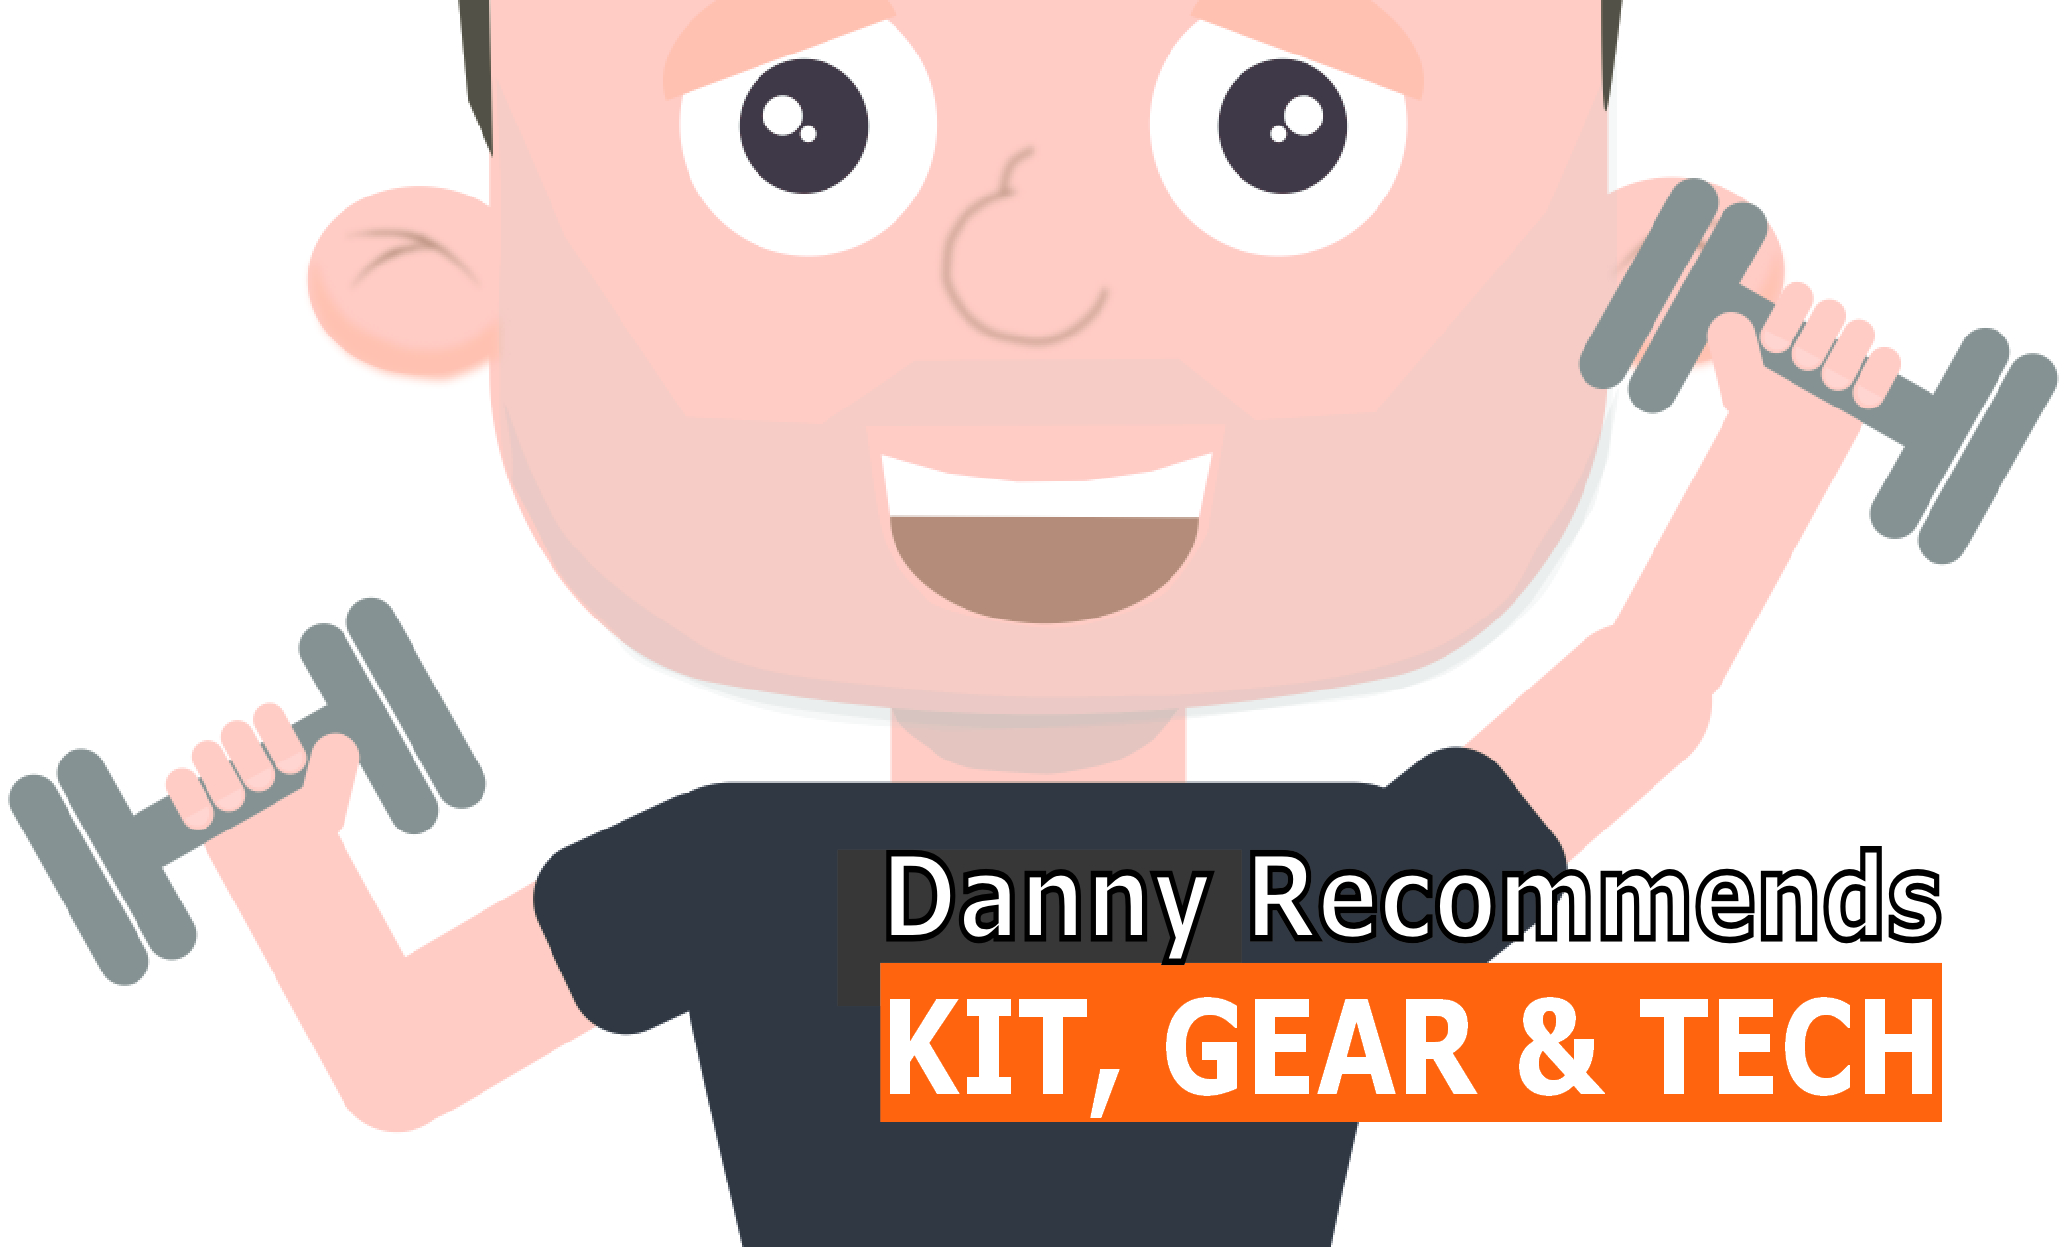 resources - Dannys product recommendation page